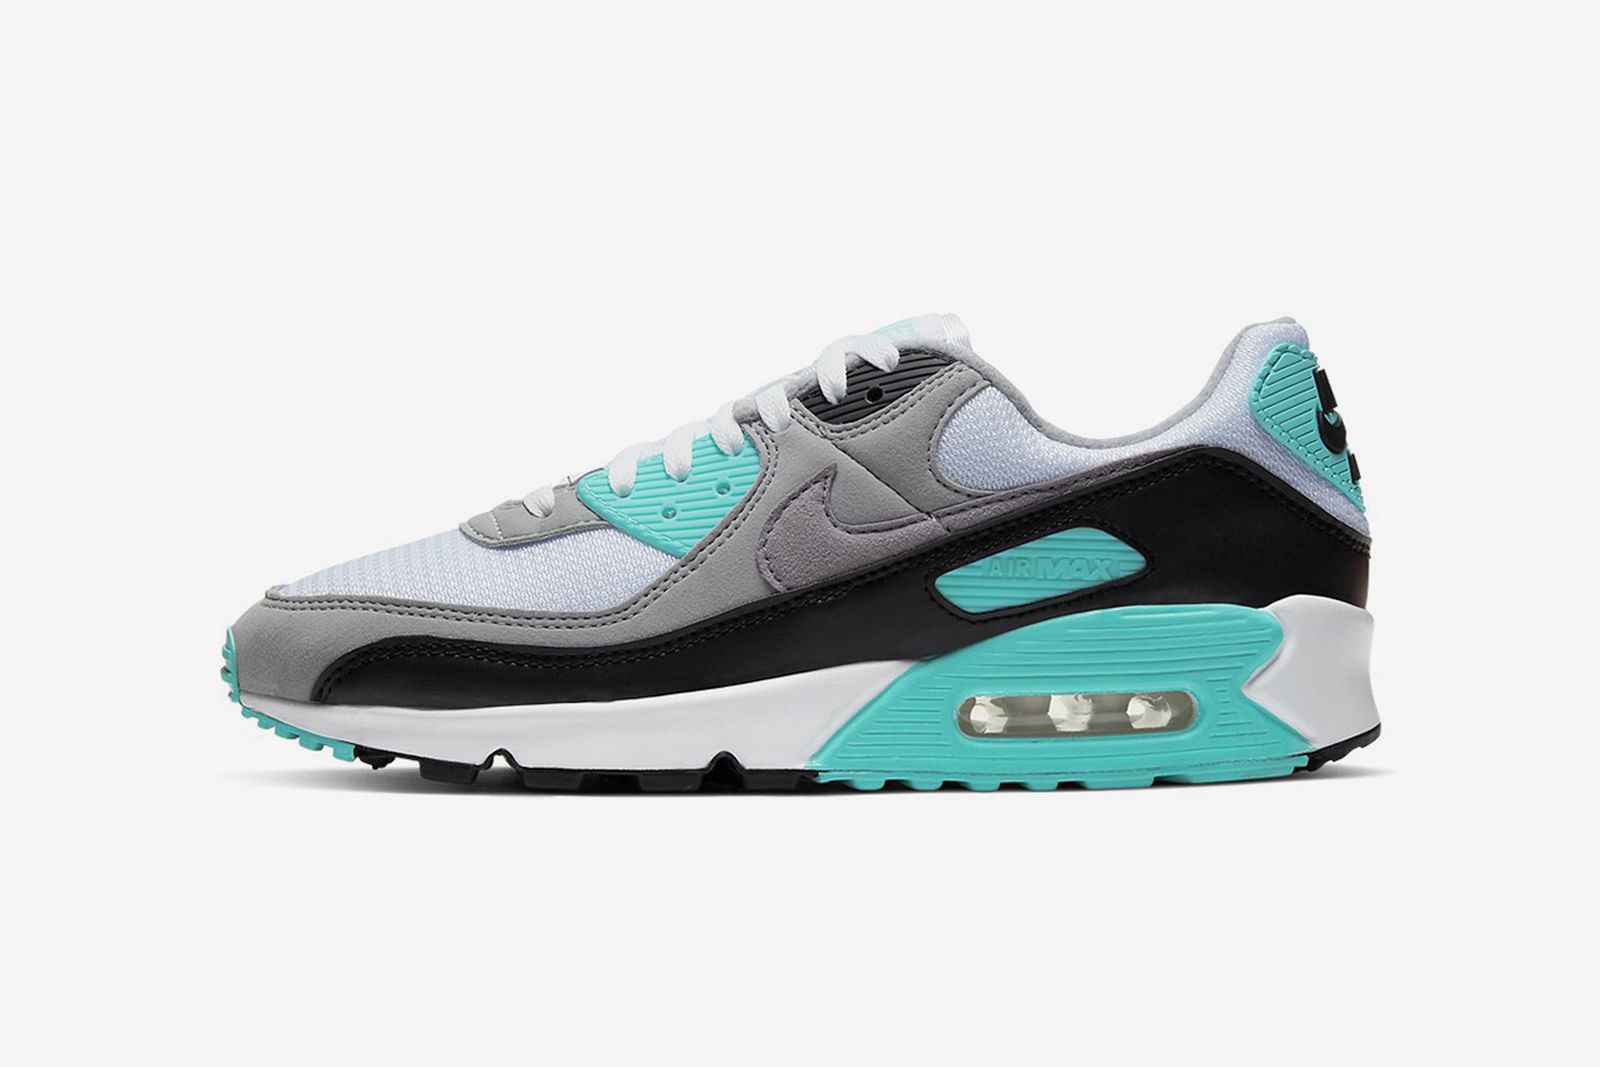 nike-air-max-90-30th-anniversary-colorways-release-date-price-1-01